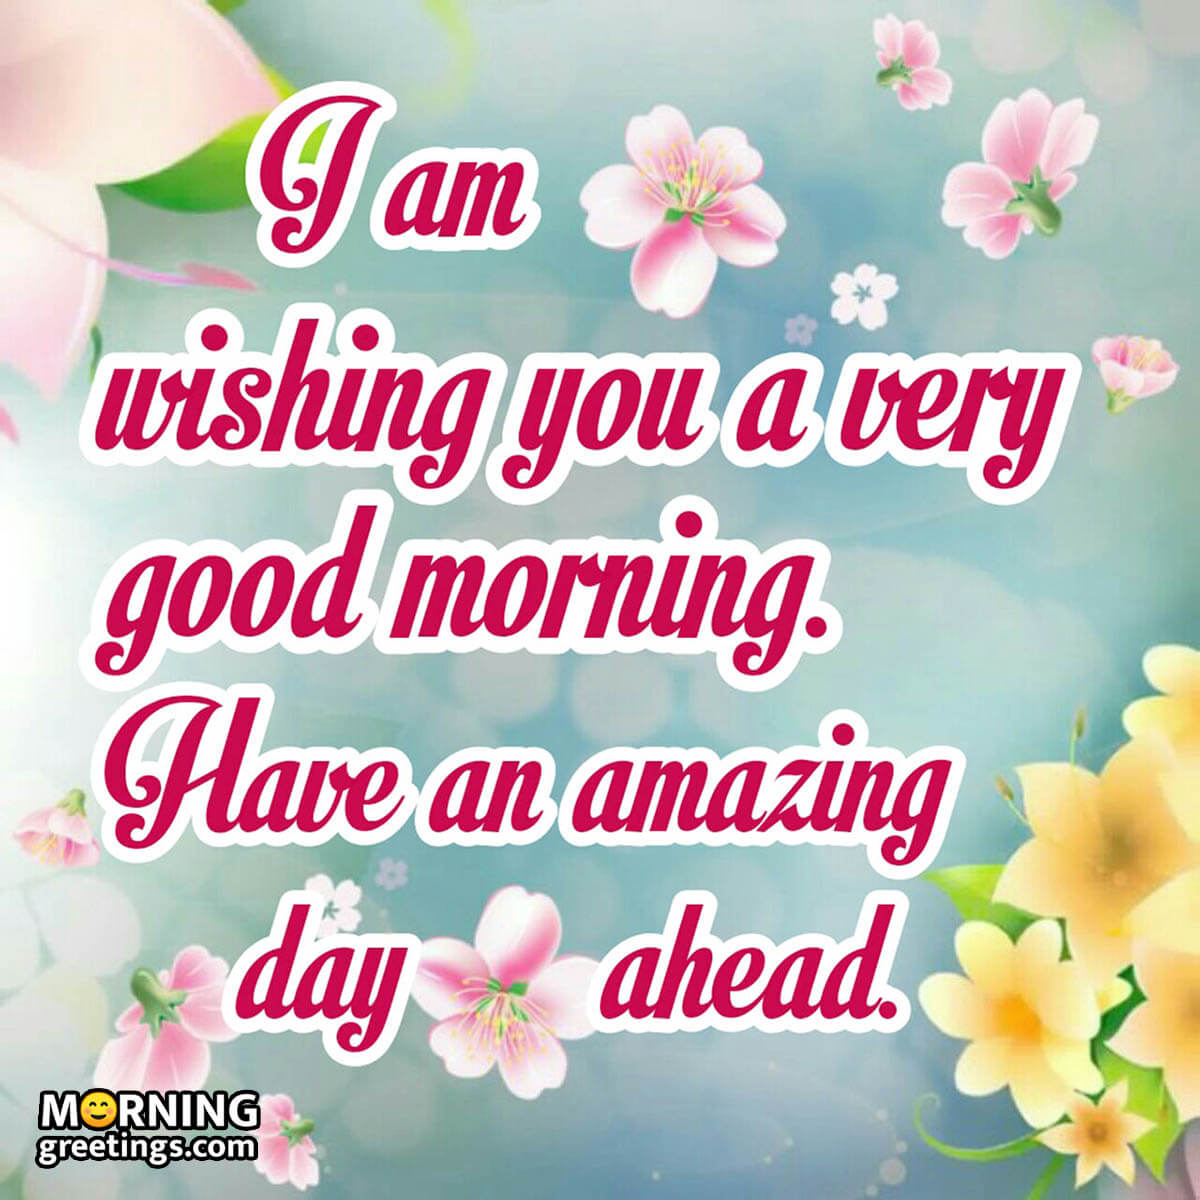 Good Morning Have An Amazing Day